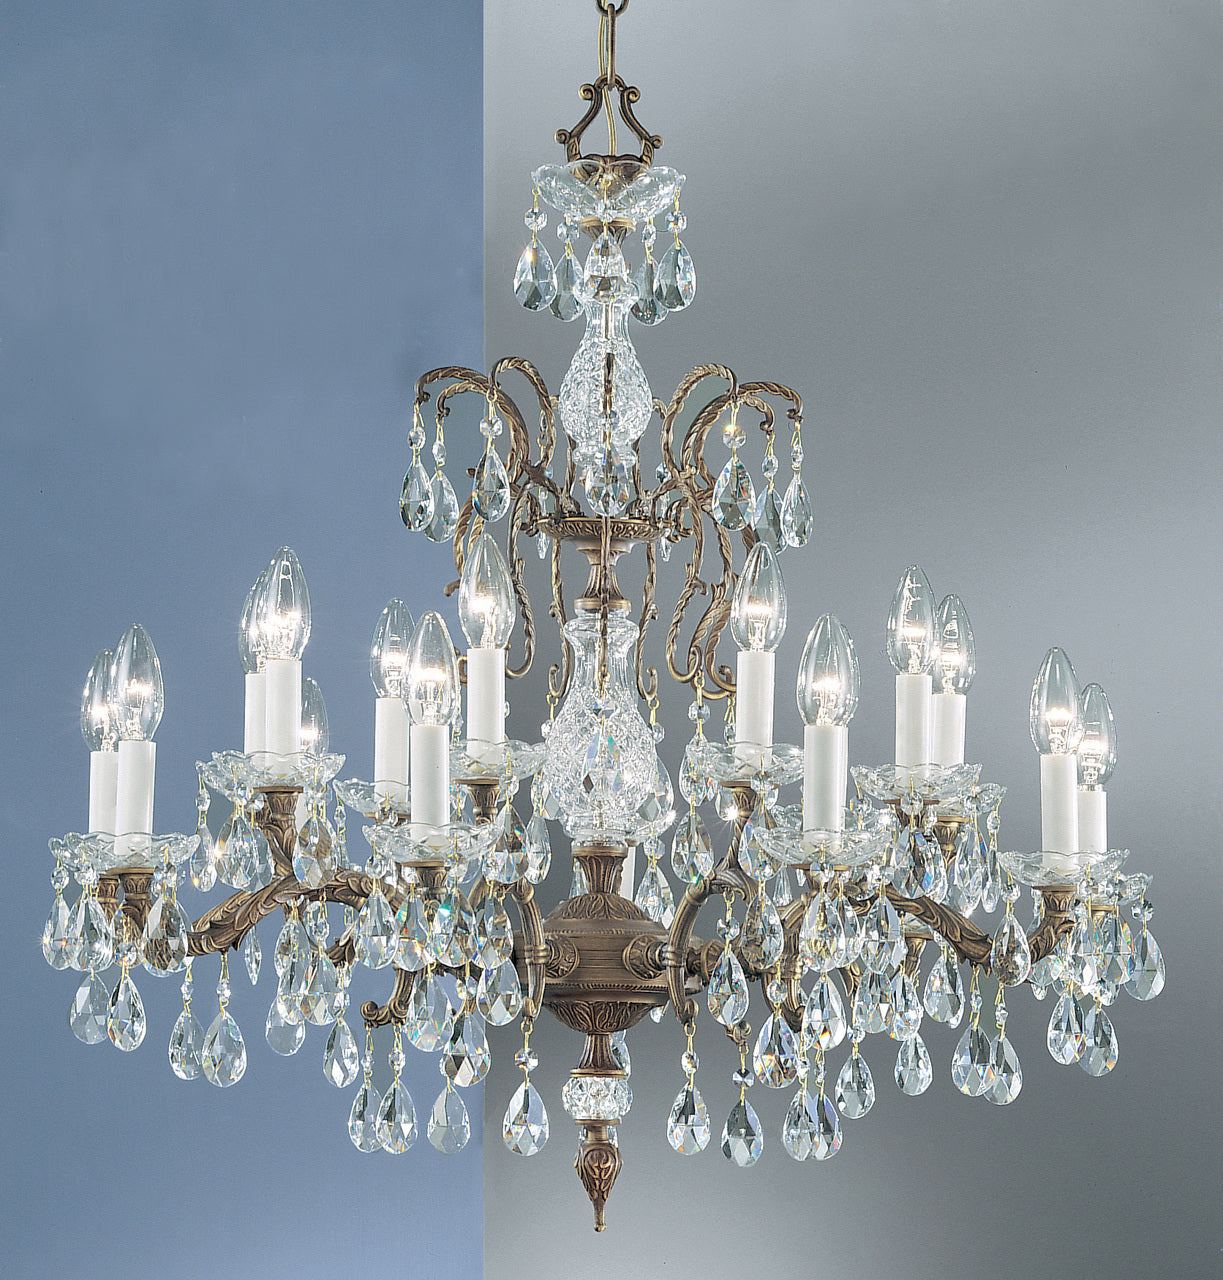 Classic Lighting 5538 OWB C Madrid Crystal/Cast Brass Chandelier in Olde World Bronze (Imported from Spain)